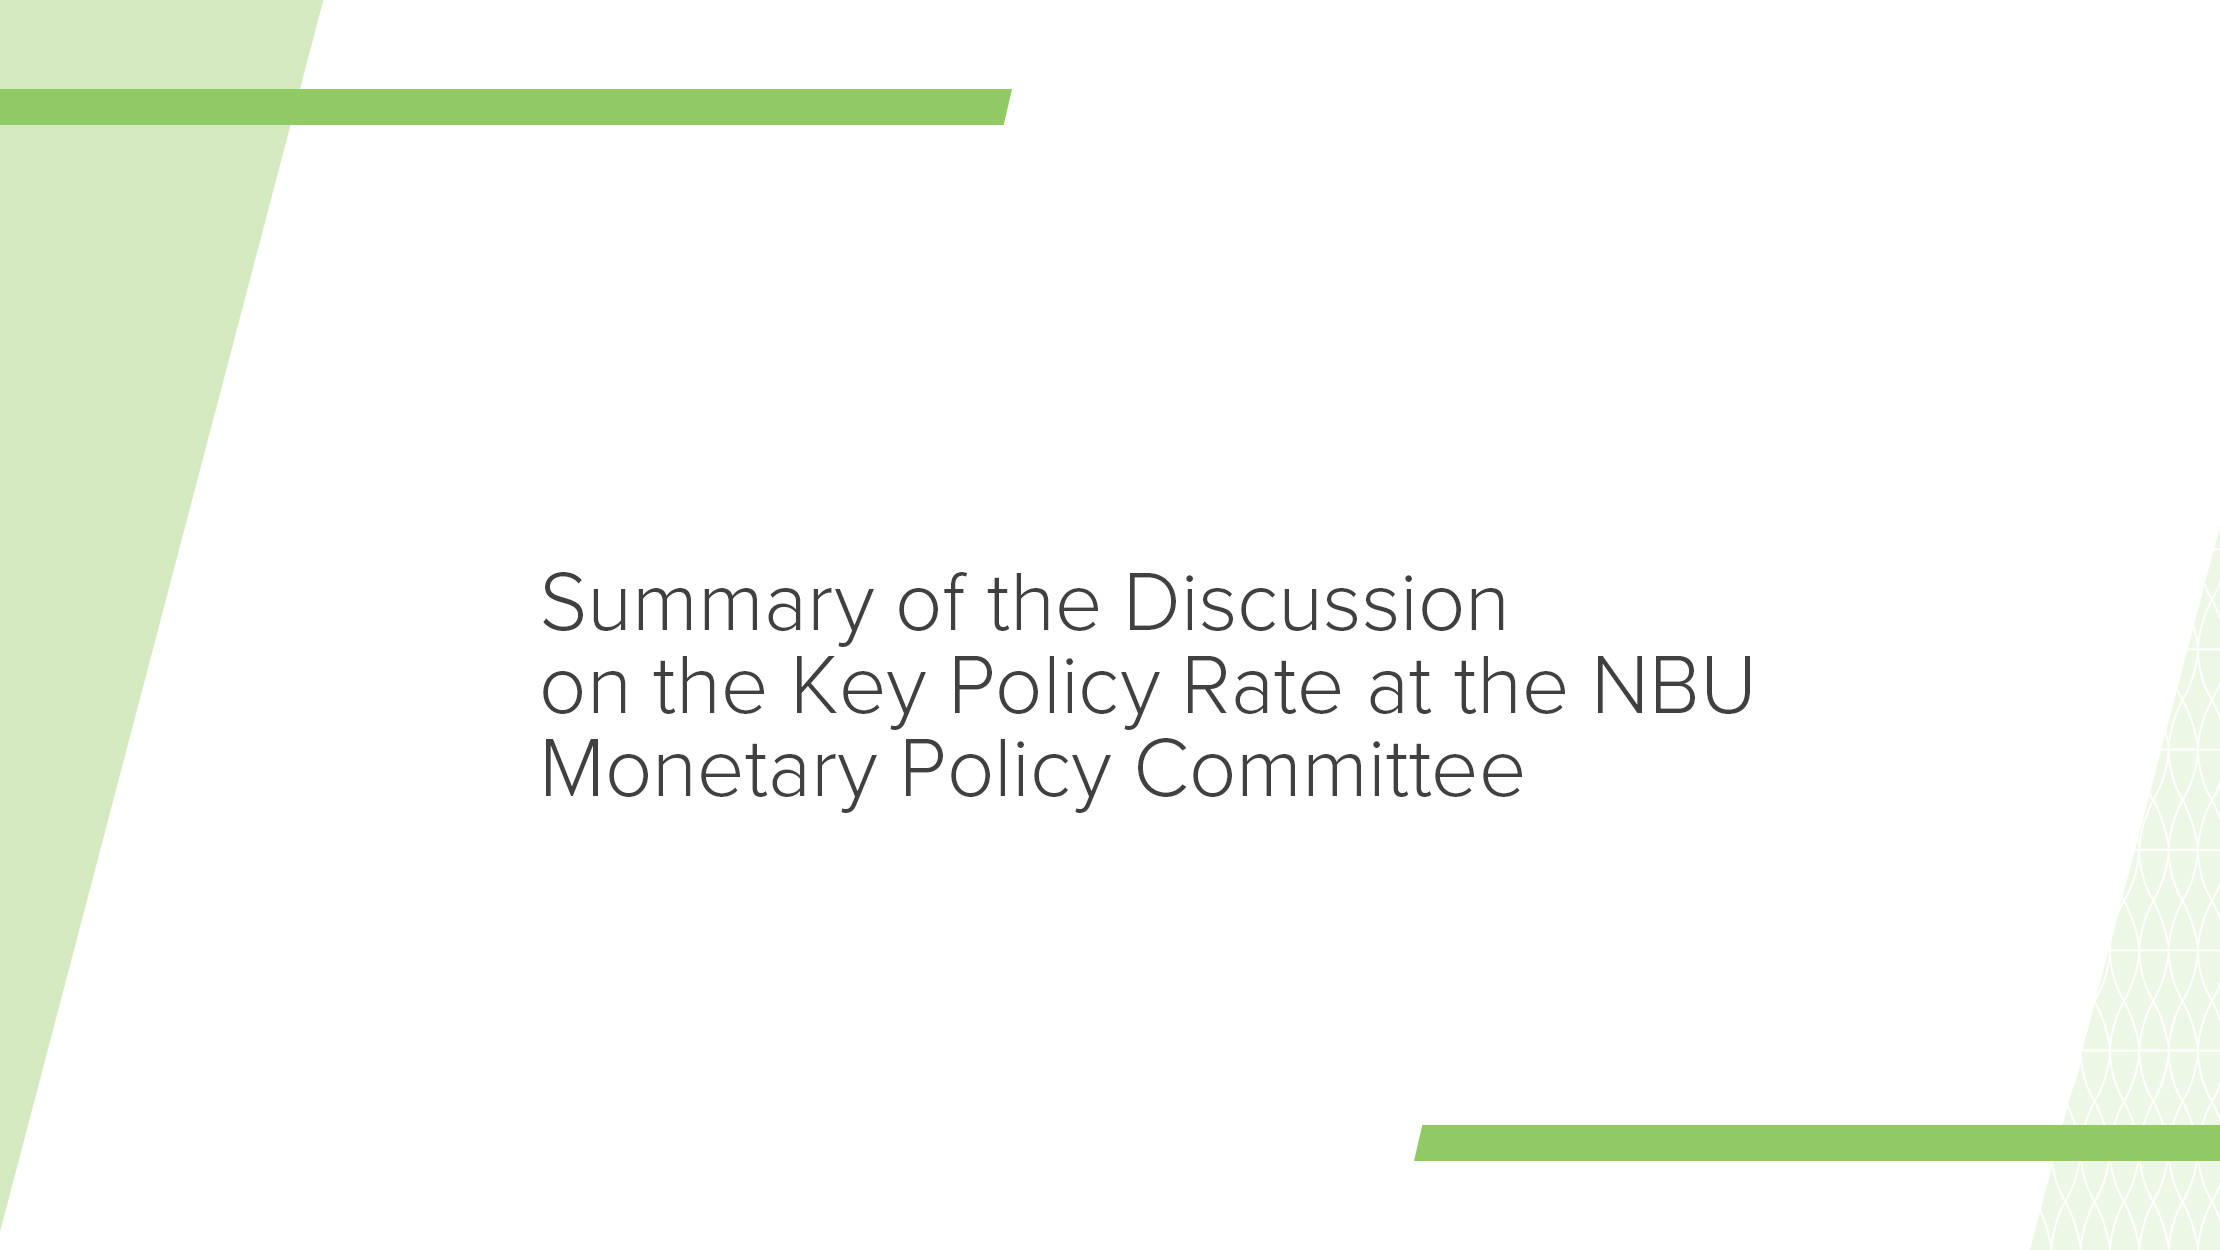 Summary of Key Policy Rate Discussion by NBU Monetary Policy Committee on 8 September 2021